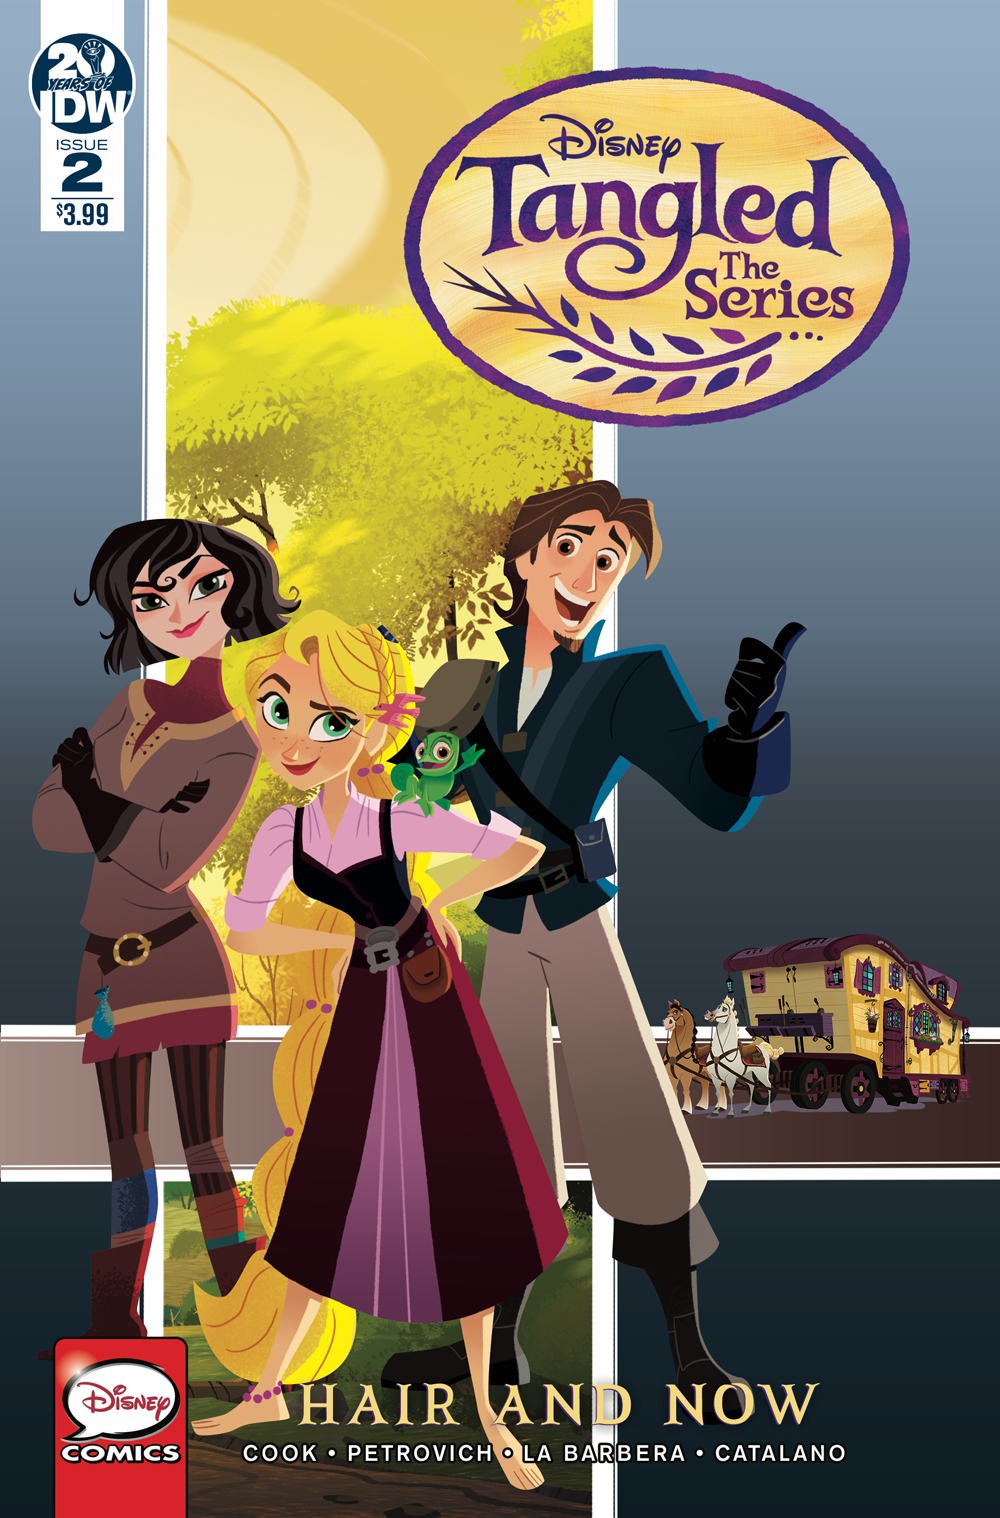 TANGLED THE SERIES HAIR & NOW #2 DISNEY